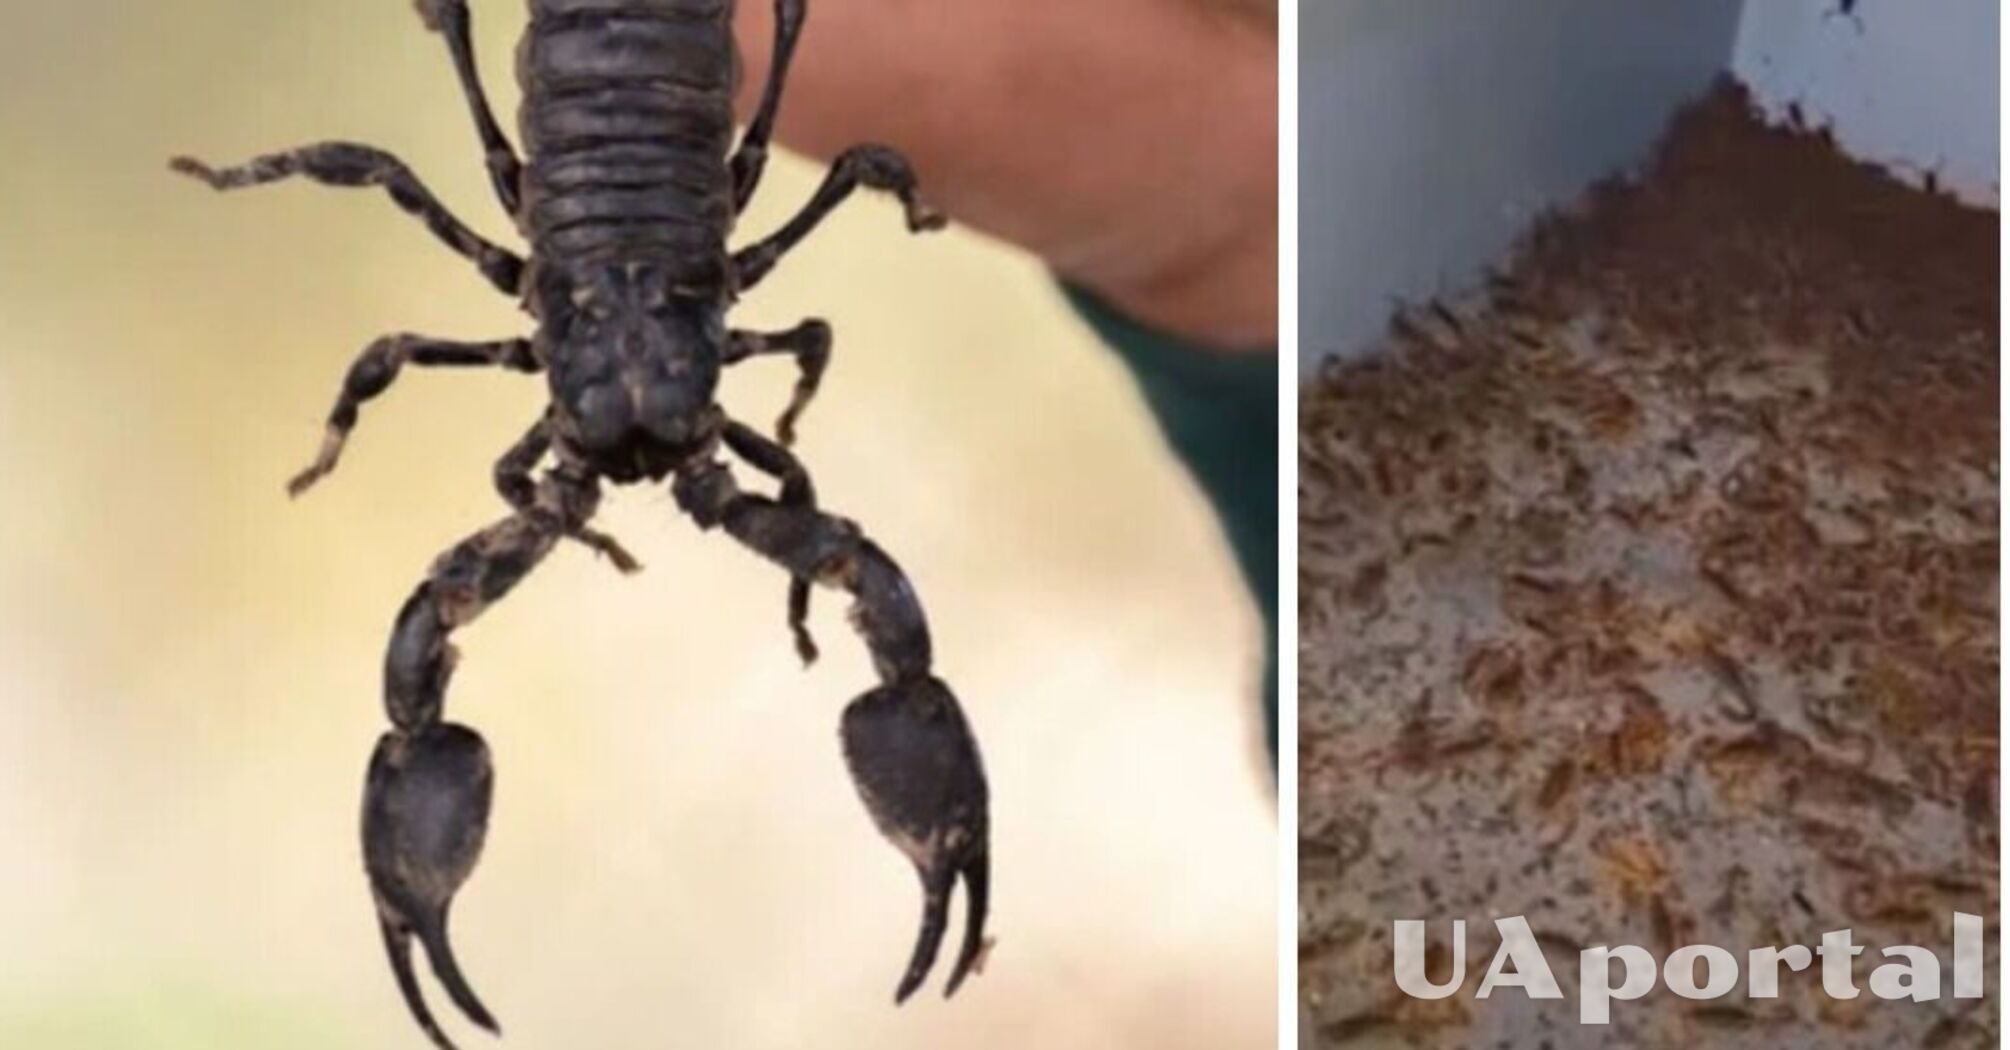 A man found thousands of scorpions in a building (creepy video)